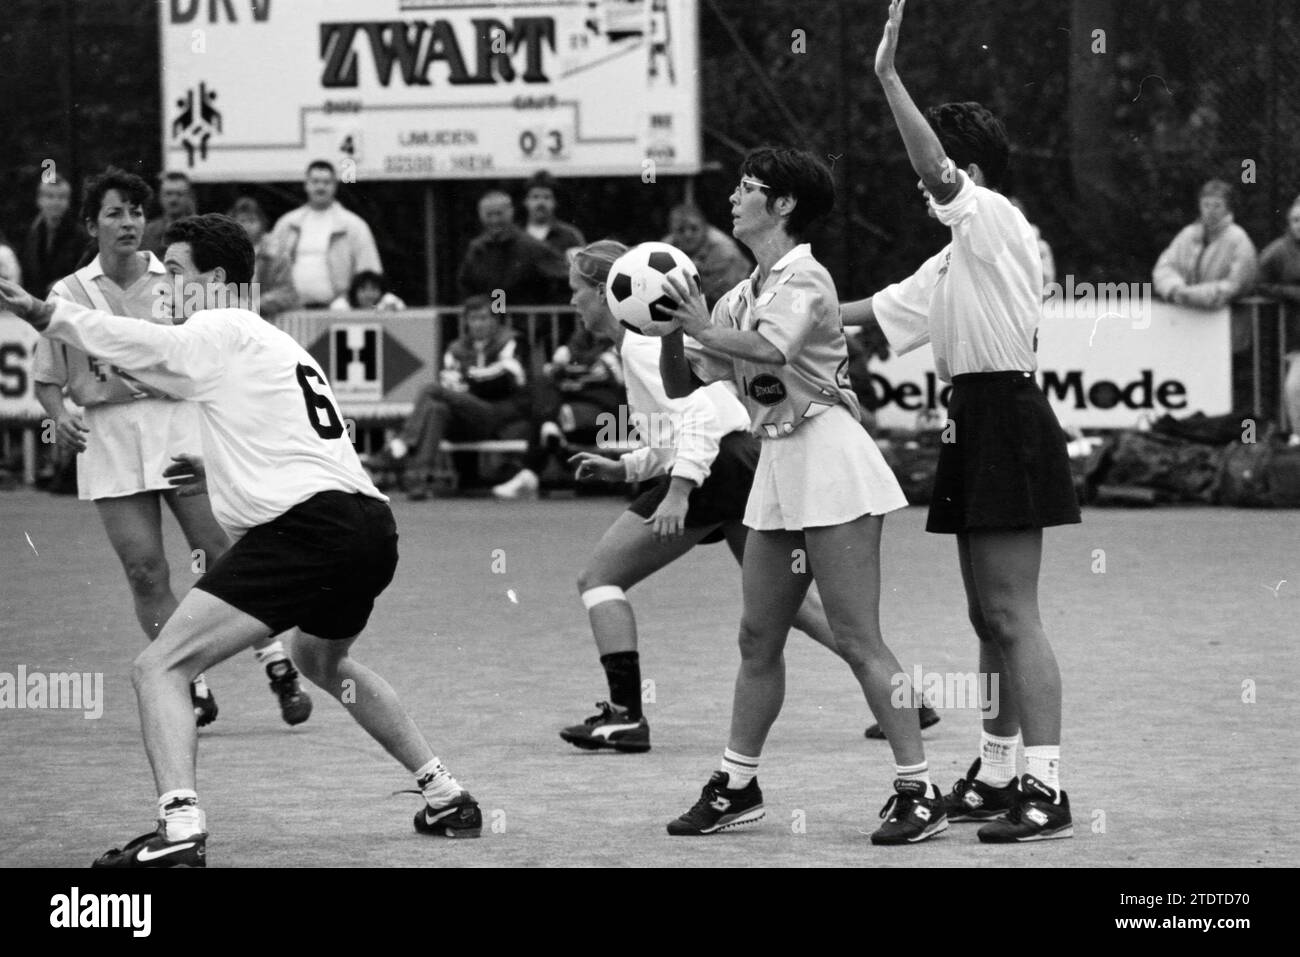 Korfball, DKV - De Overkanters, 08-10-1993, Whizgle News from the Past, Tailored for the Future. Explore historical narratives, Dutch The Netherlands agency image with a modern perspective, bridging the gap between yesterday's events and tomorrow's insights. A timeless journey shaping the stories that shape our future Stock Photo